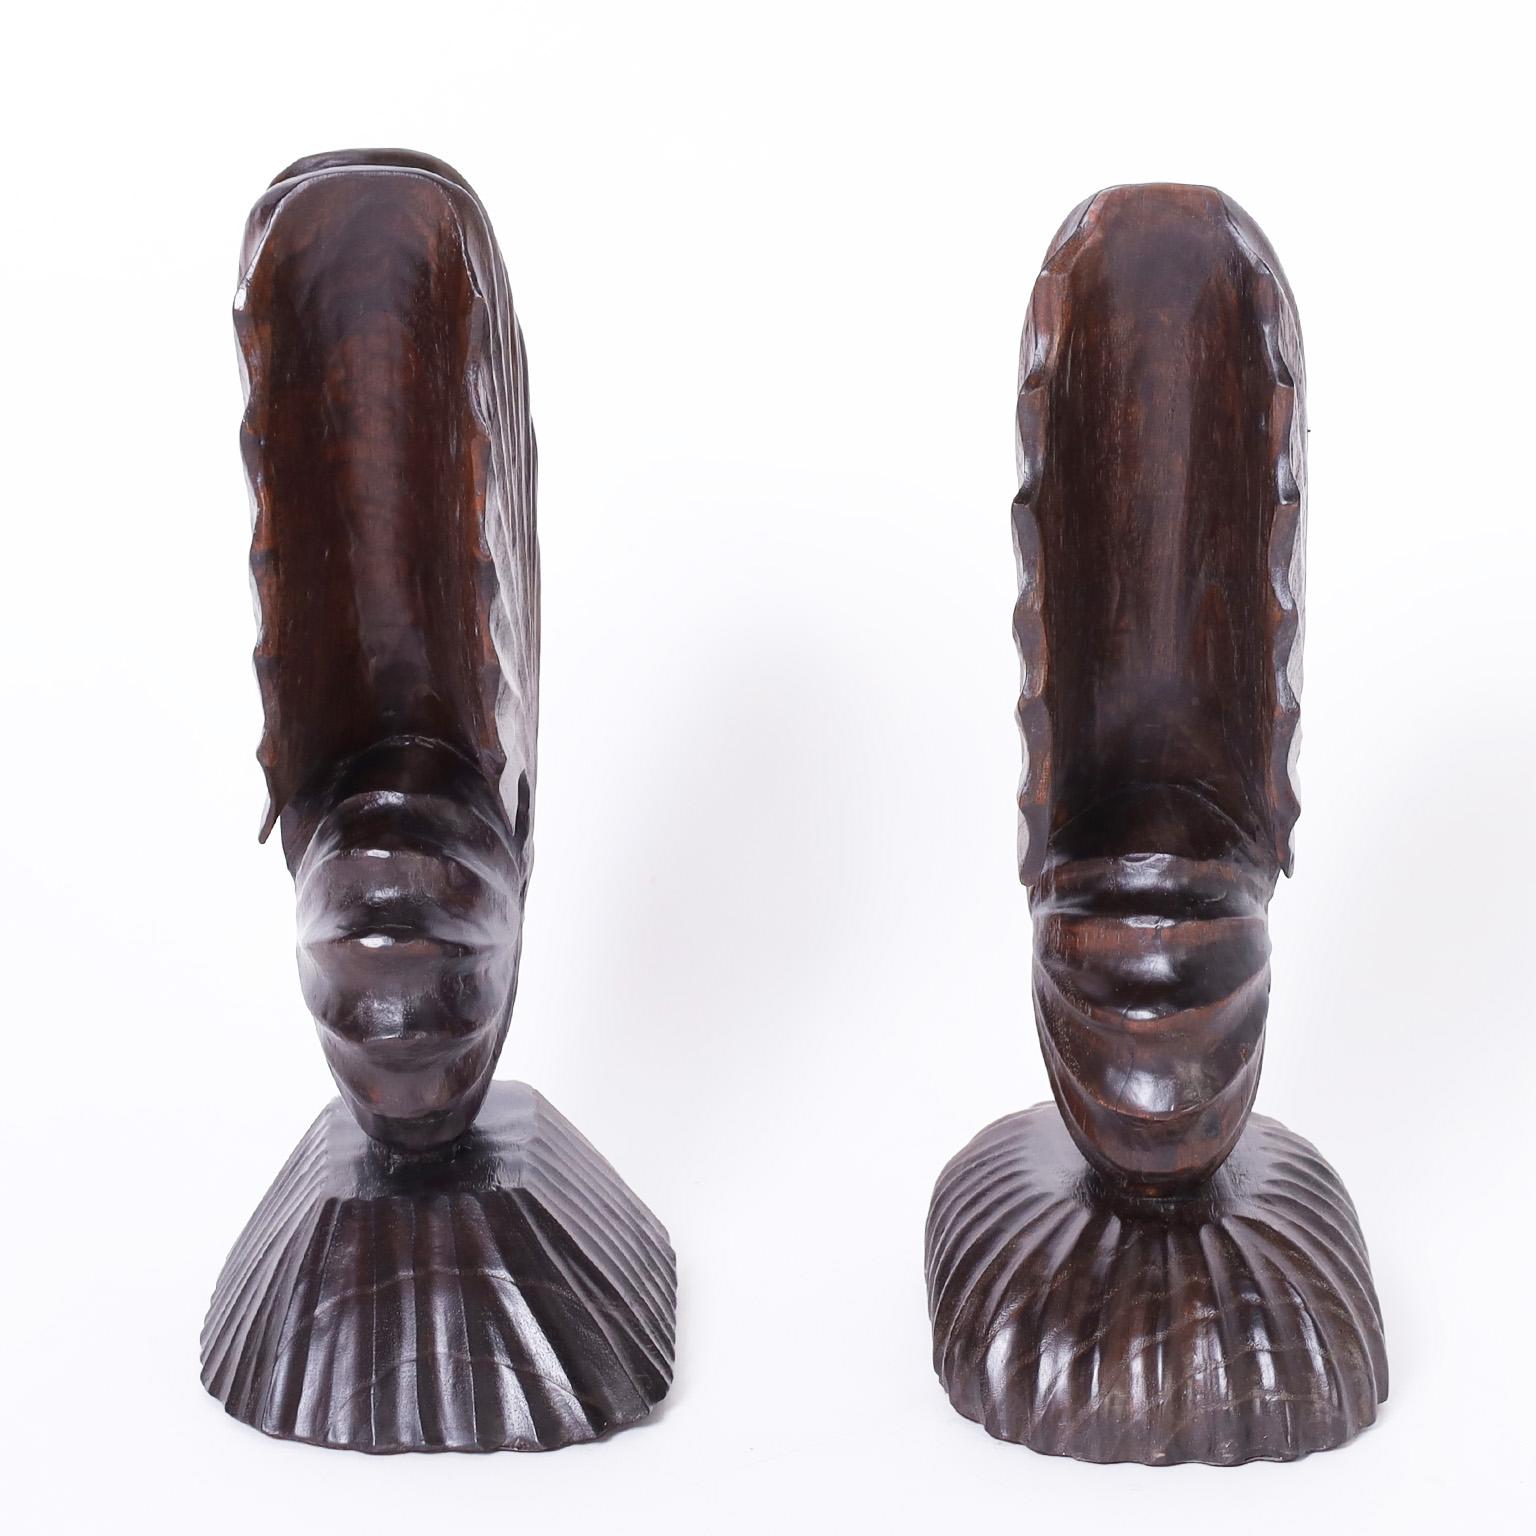 Mid-century nautilus sculptures or objects of art carved from mahogany in a stylized form with a dark lush finish.